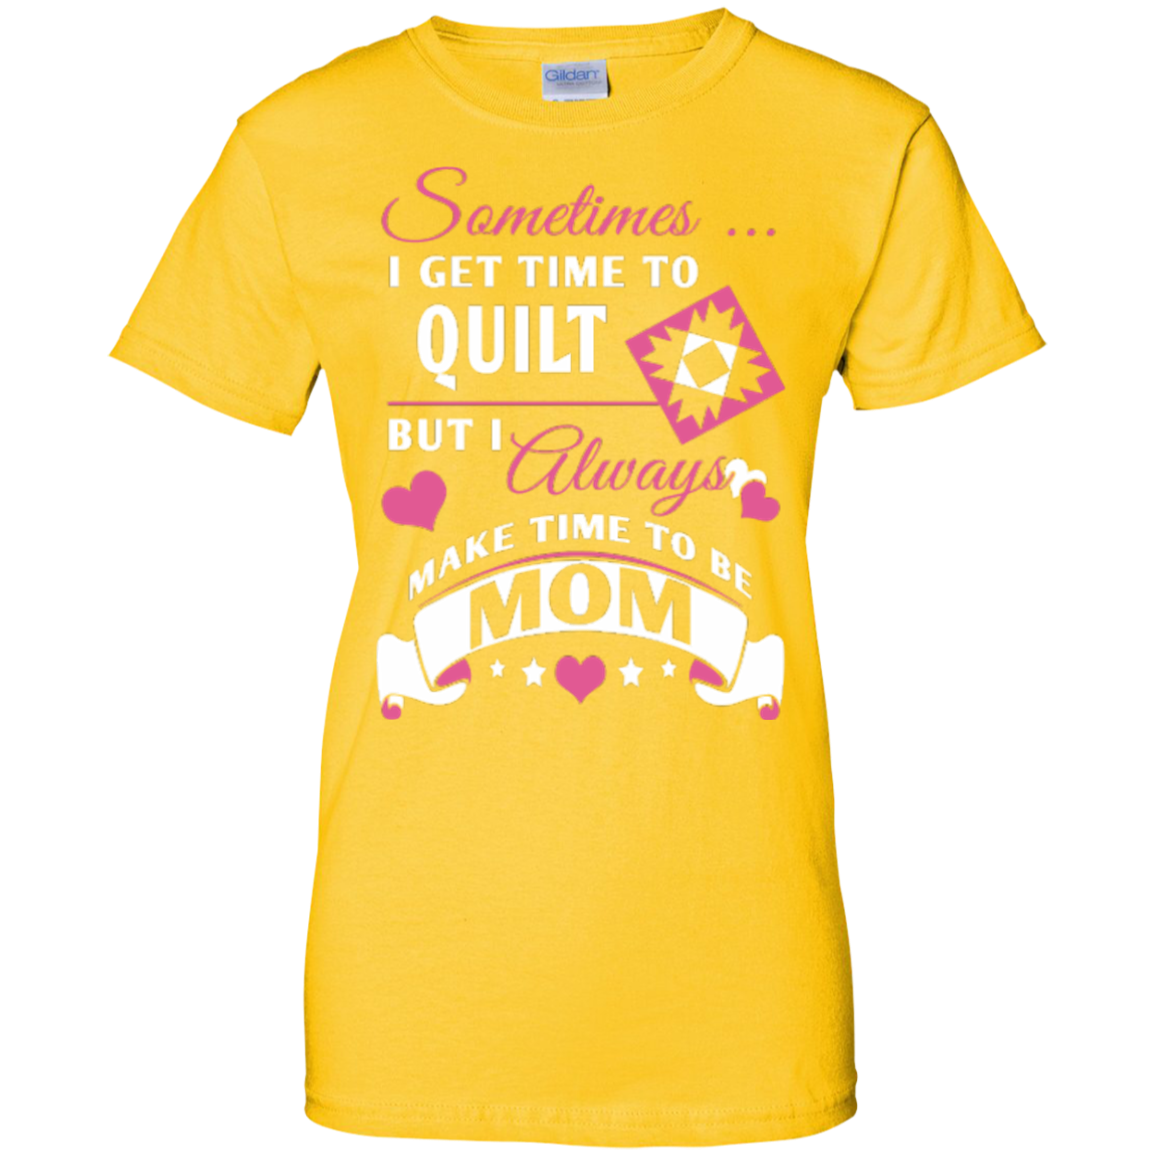 Time-Quilt-Mom Ladies Custom 100% Cotton T-Shirt - Crafter4Life - 1